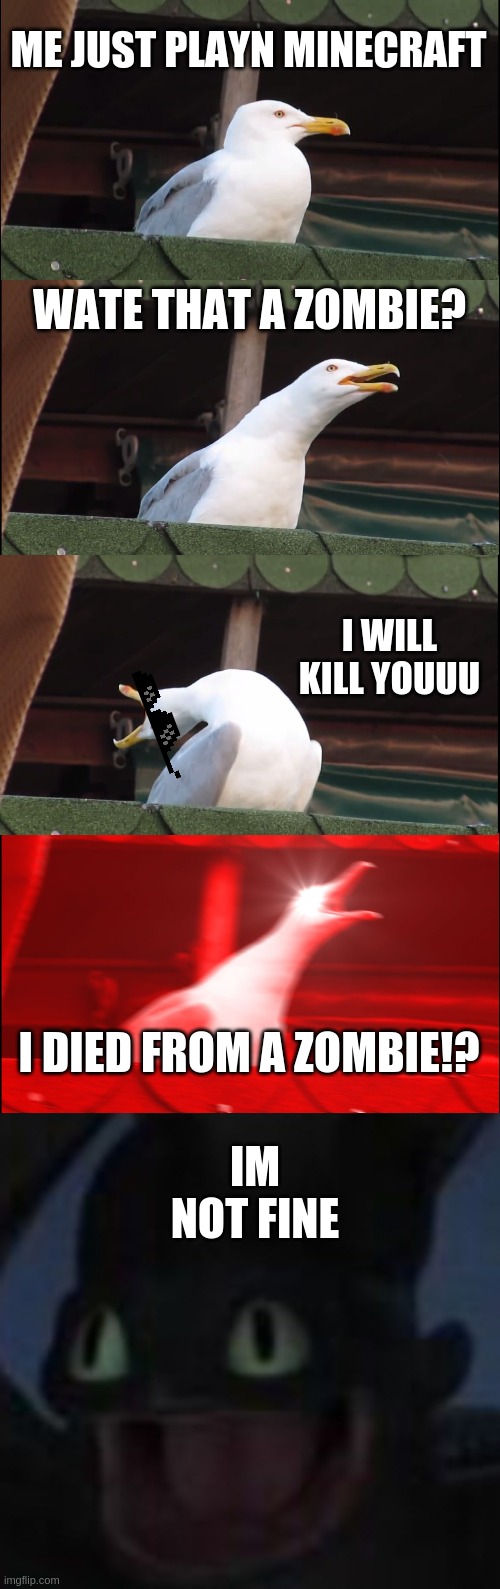 i died to a zombie .-. | ME JUST PLAYN MINECRAFT; WATE THAT A ZOMBIE? I WILL KILL YOUUU; IM NOT FINE; I DIED FROM A ZOMBIE!? | image tagged in memes,inhaling seagull,how to train your dragon 3 | made w/ Imgflip meme maker